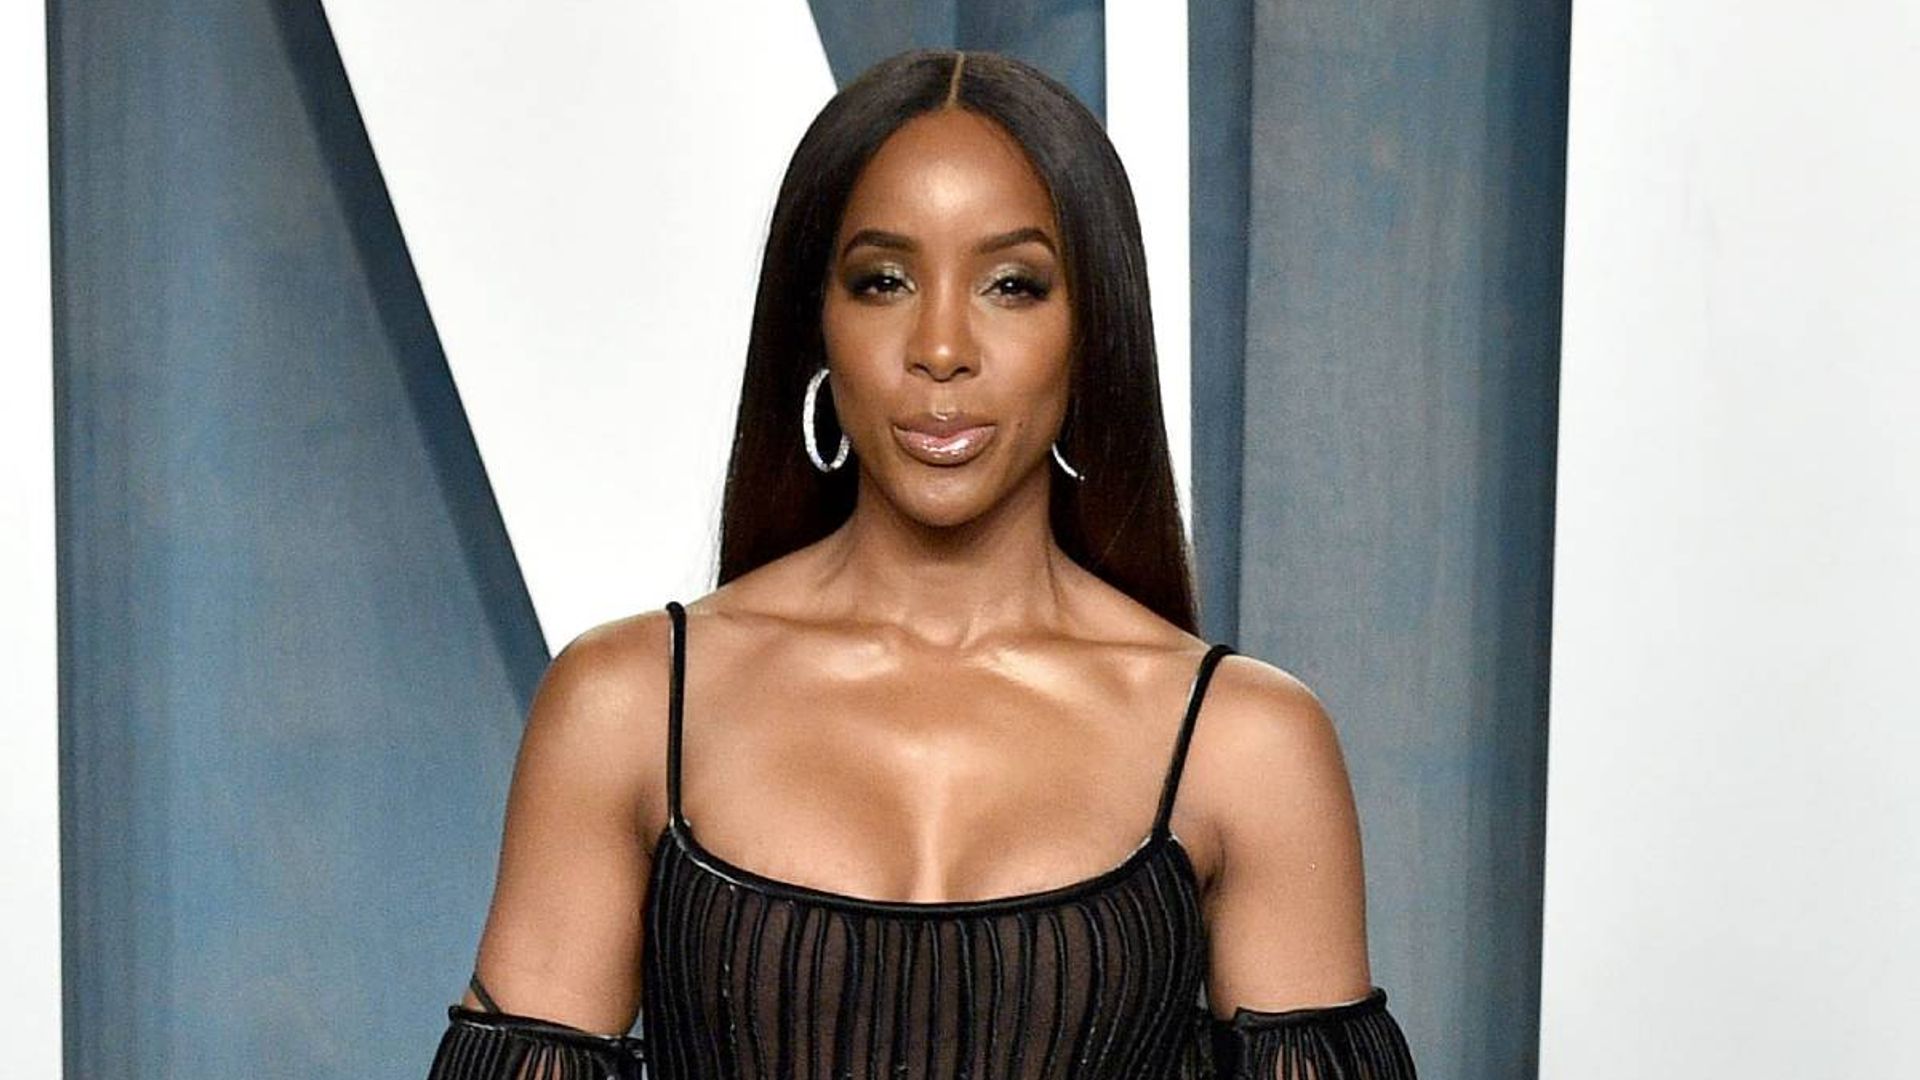 Kelly Rowland steps away from music as she embarks on new unexpected venture